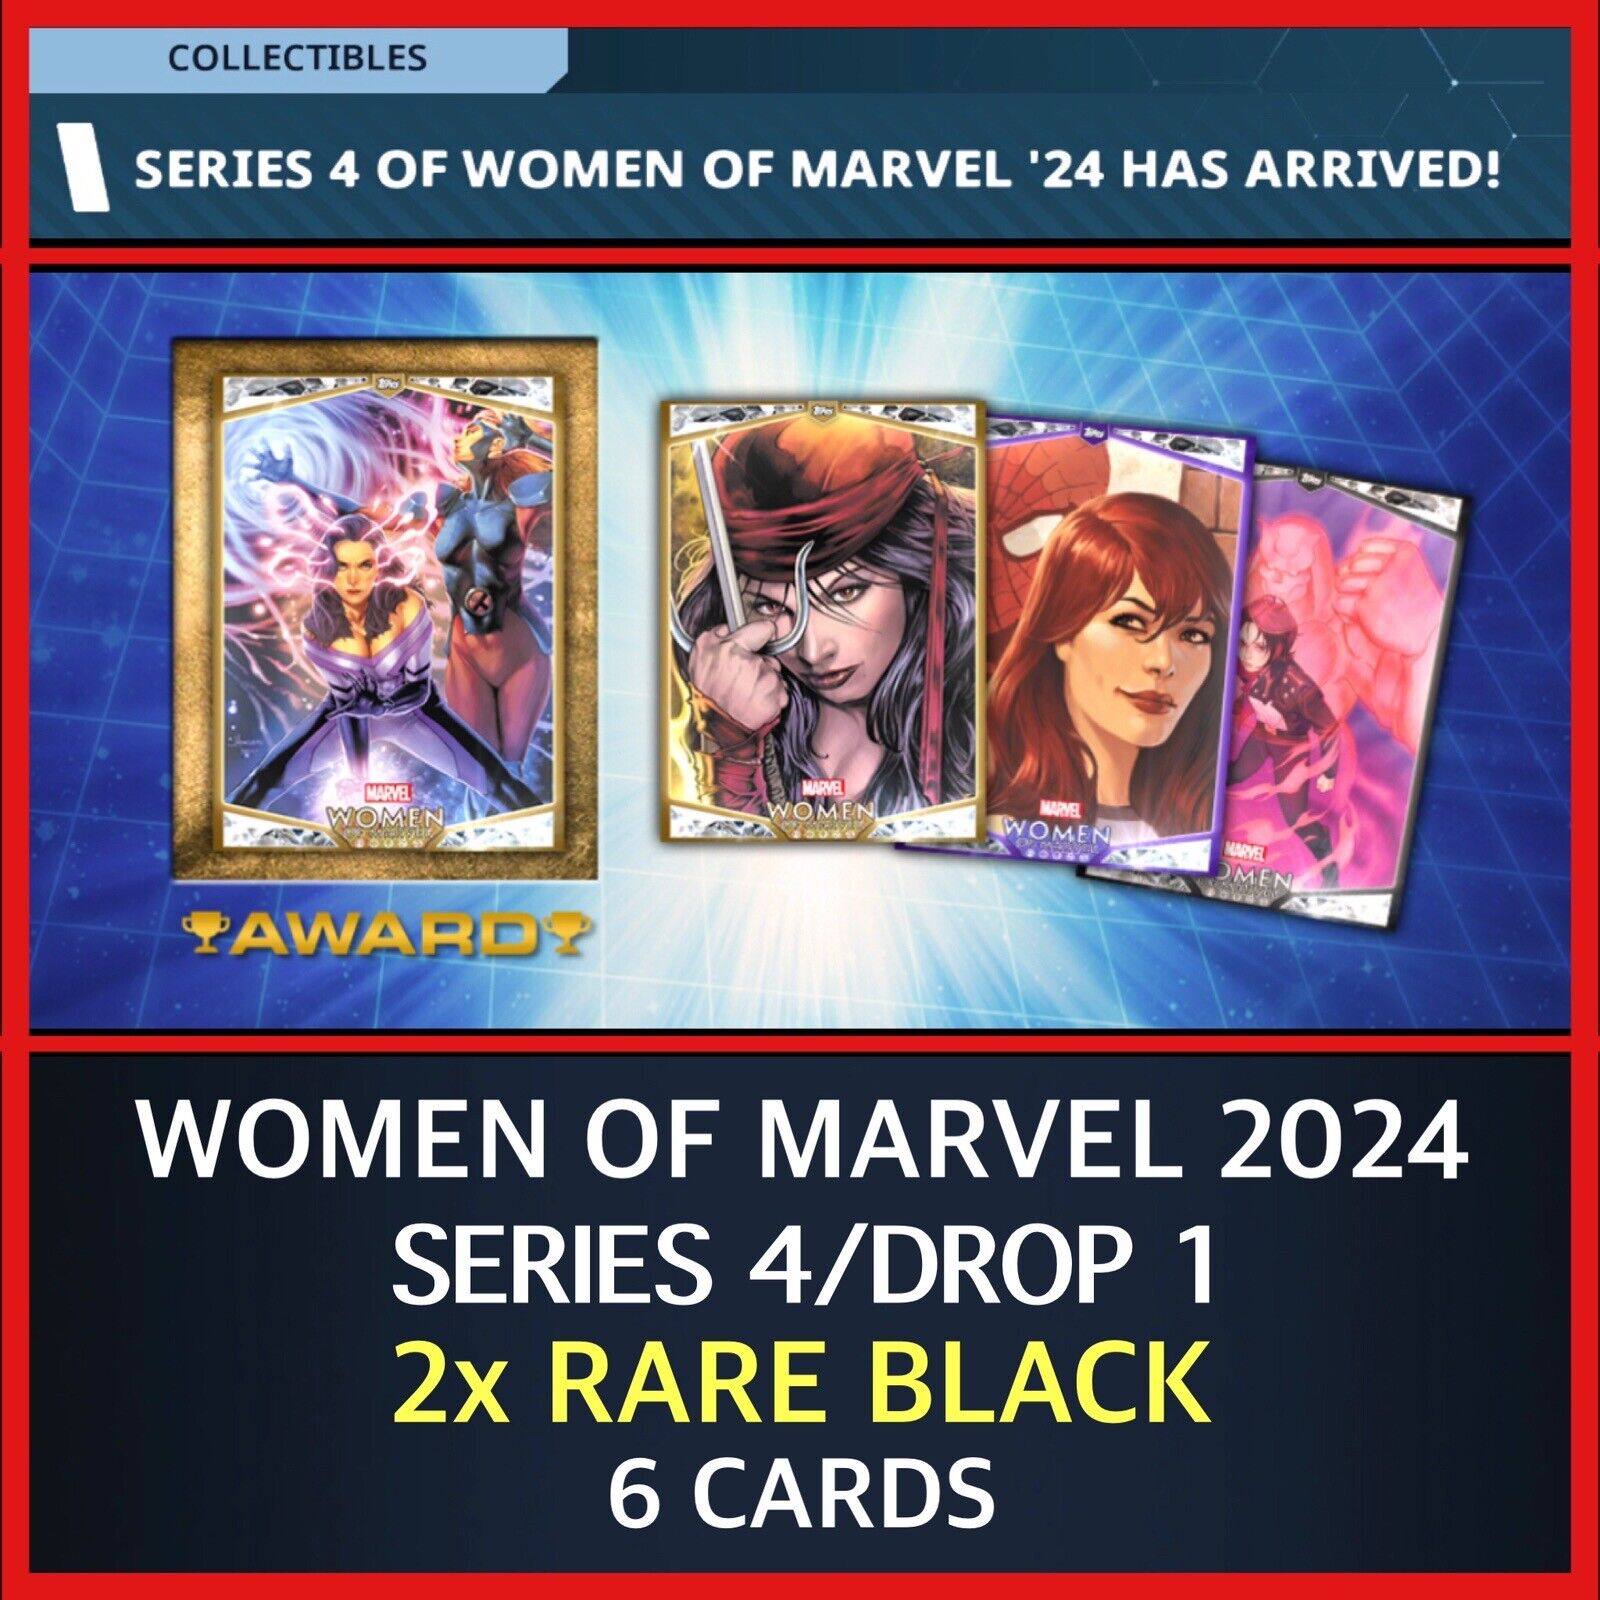 WOMEN OF MARVEL ‘24-SERIES 4/DROP 1-TWO RARE BLACK SETS-TOPPS MARVEL COLLECT